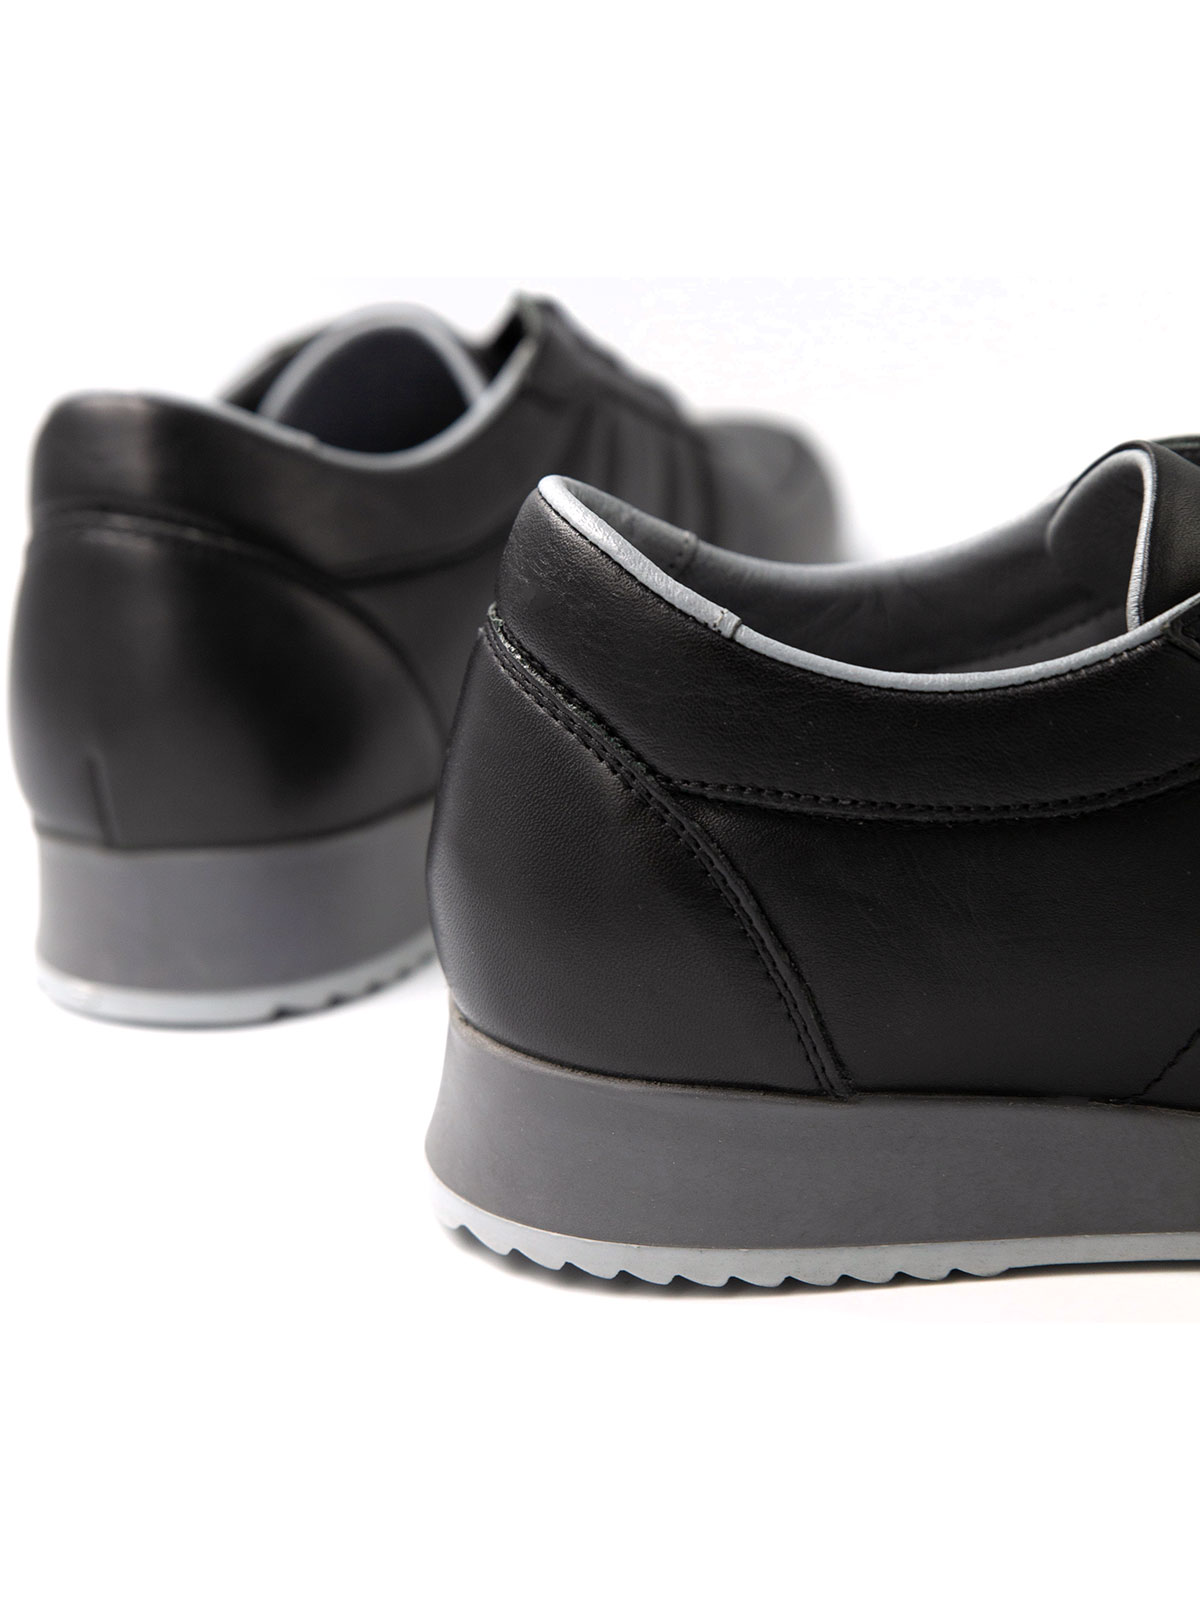 Sporty black leather shoes - 81100 - € 41.62 img4